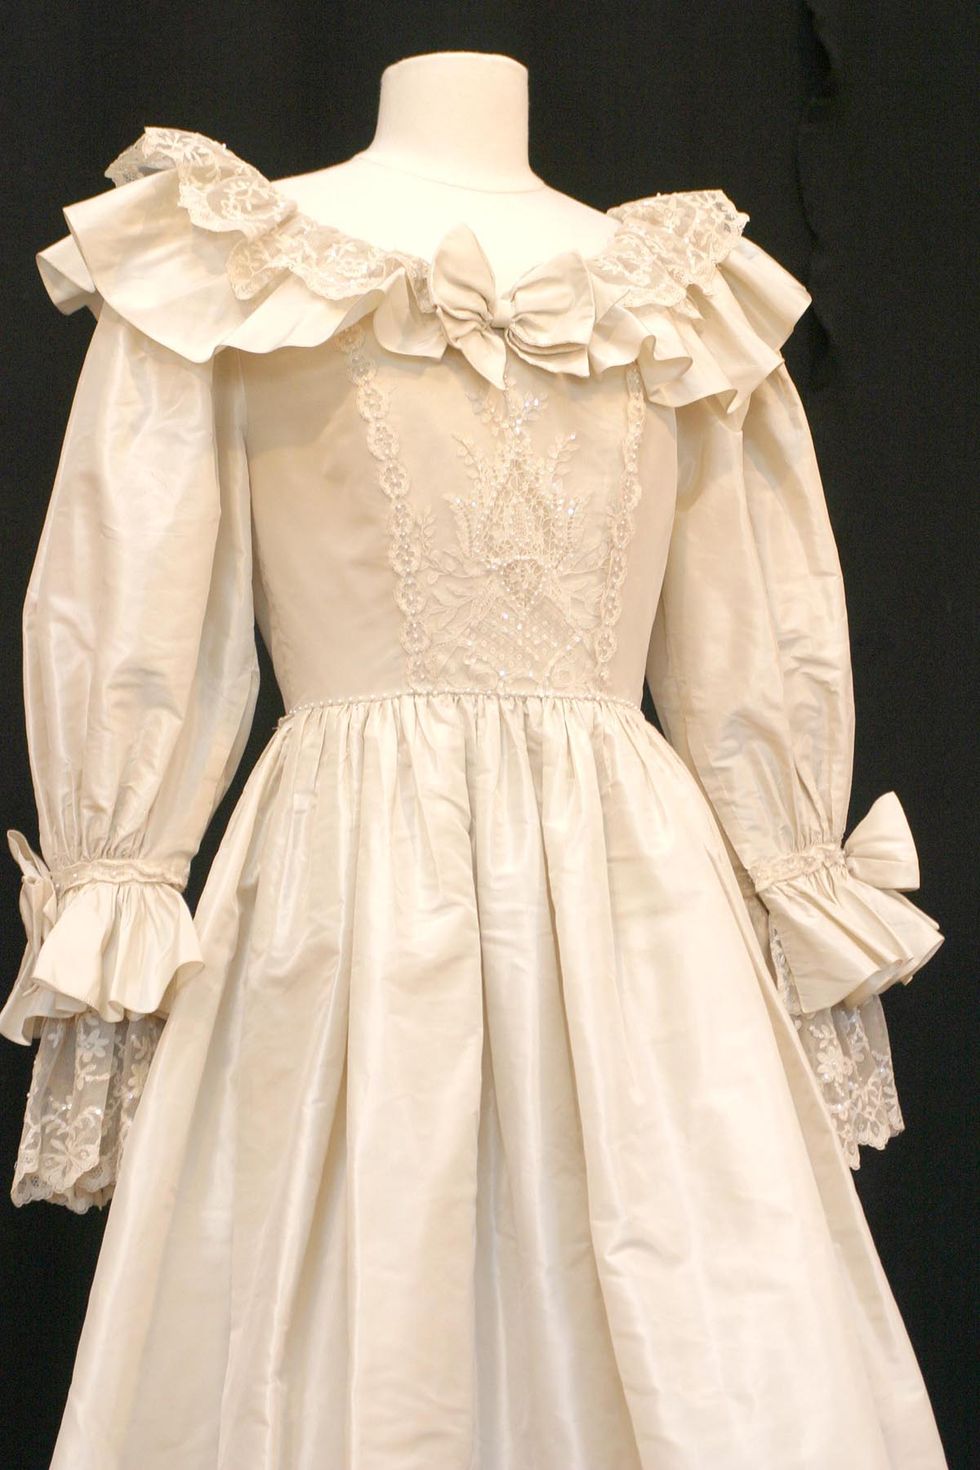 Clothing, Dress, White, Victorian fashion, Ruffle, Gown, Fashion, Sleeve, Day dress, Bridal party dress, 